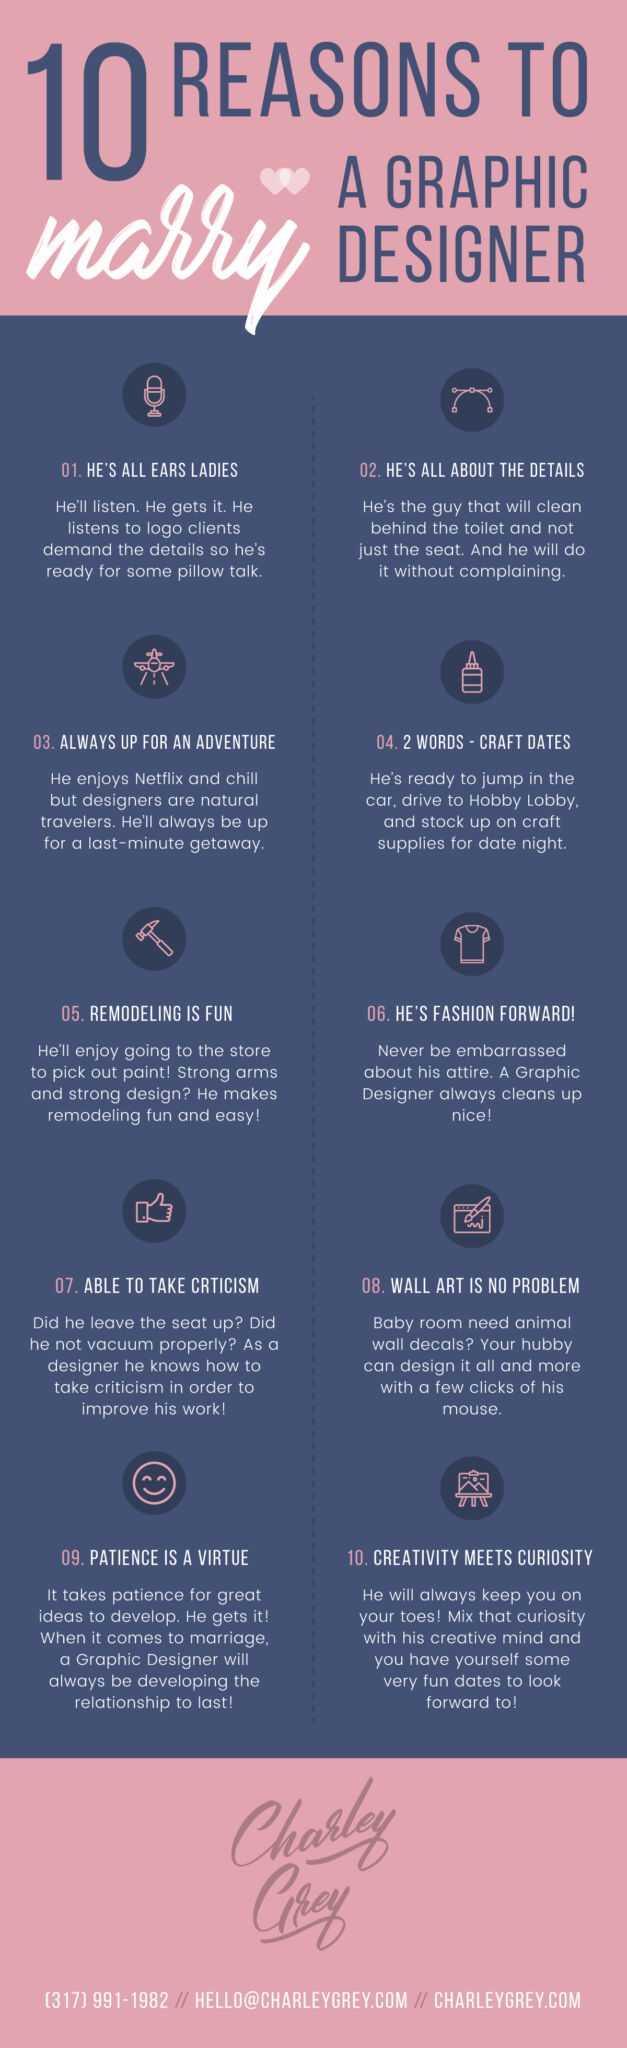 10 reasons to marry a graphic designer infographic